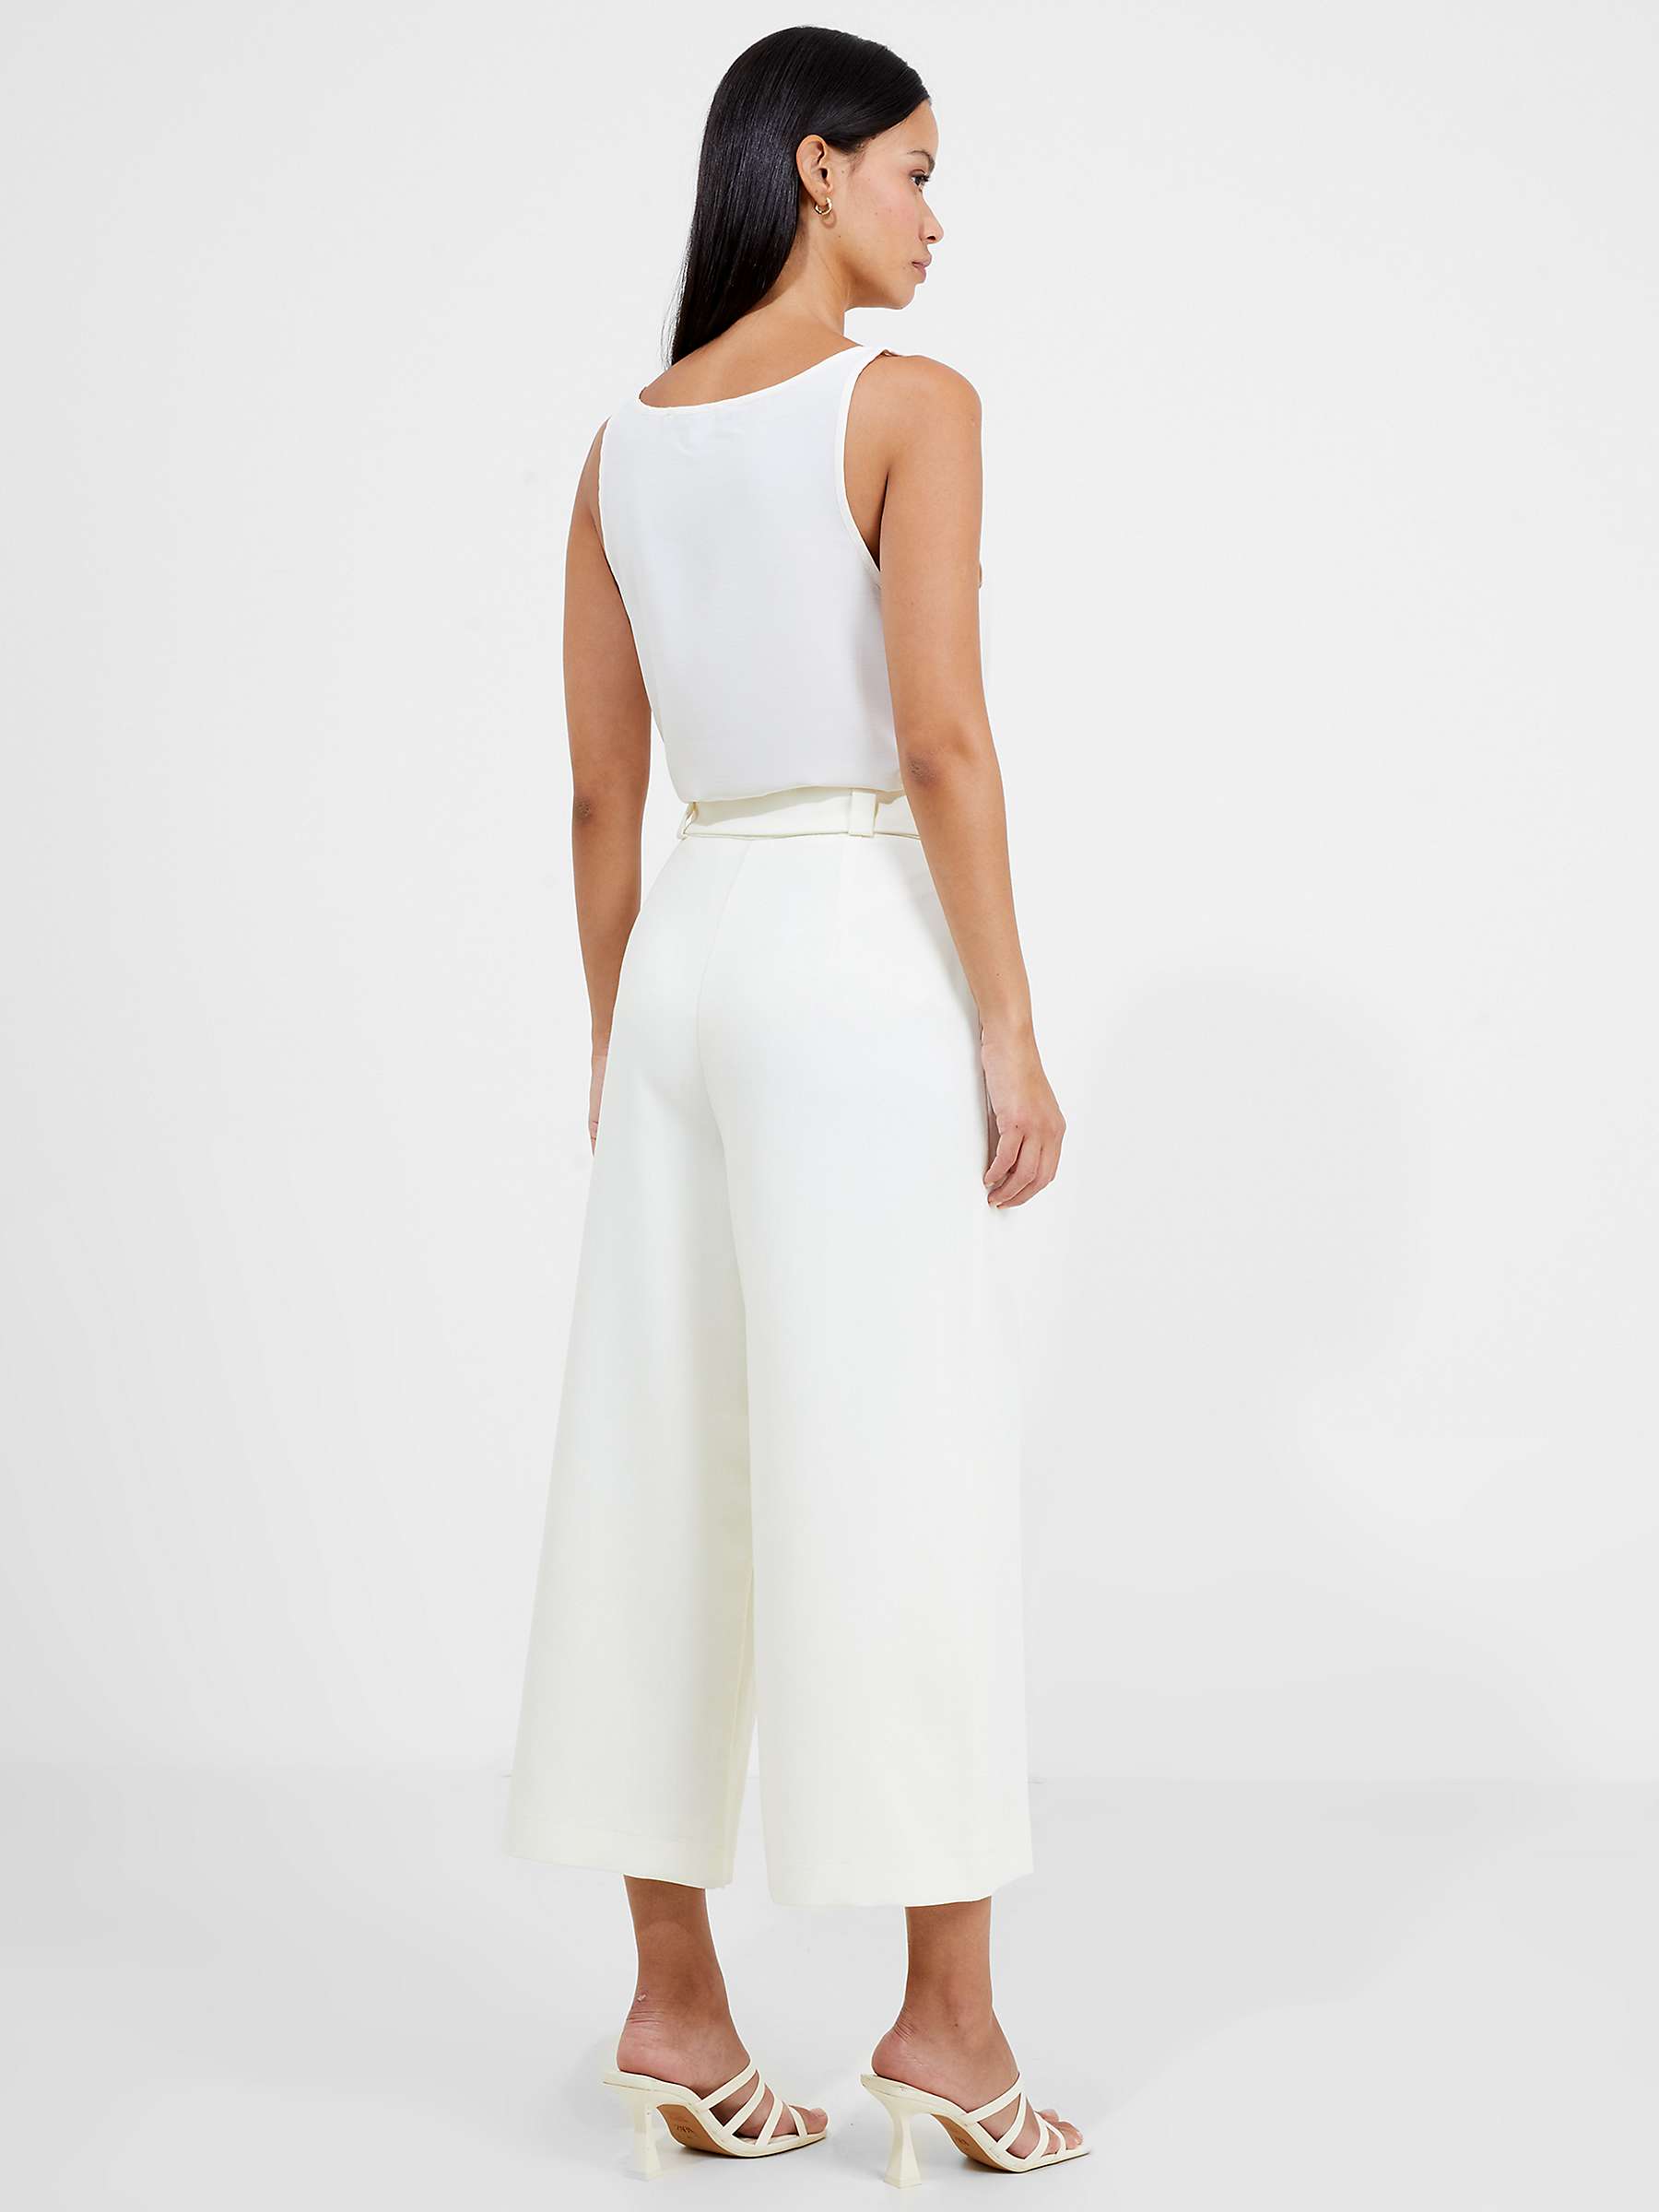 Buy French Connection Lux Ankle Grazer Trousers Online at johnlewis.com